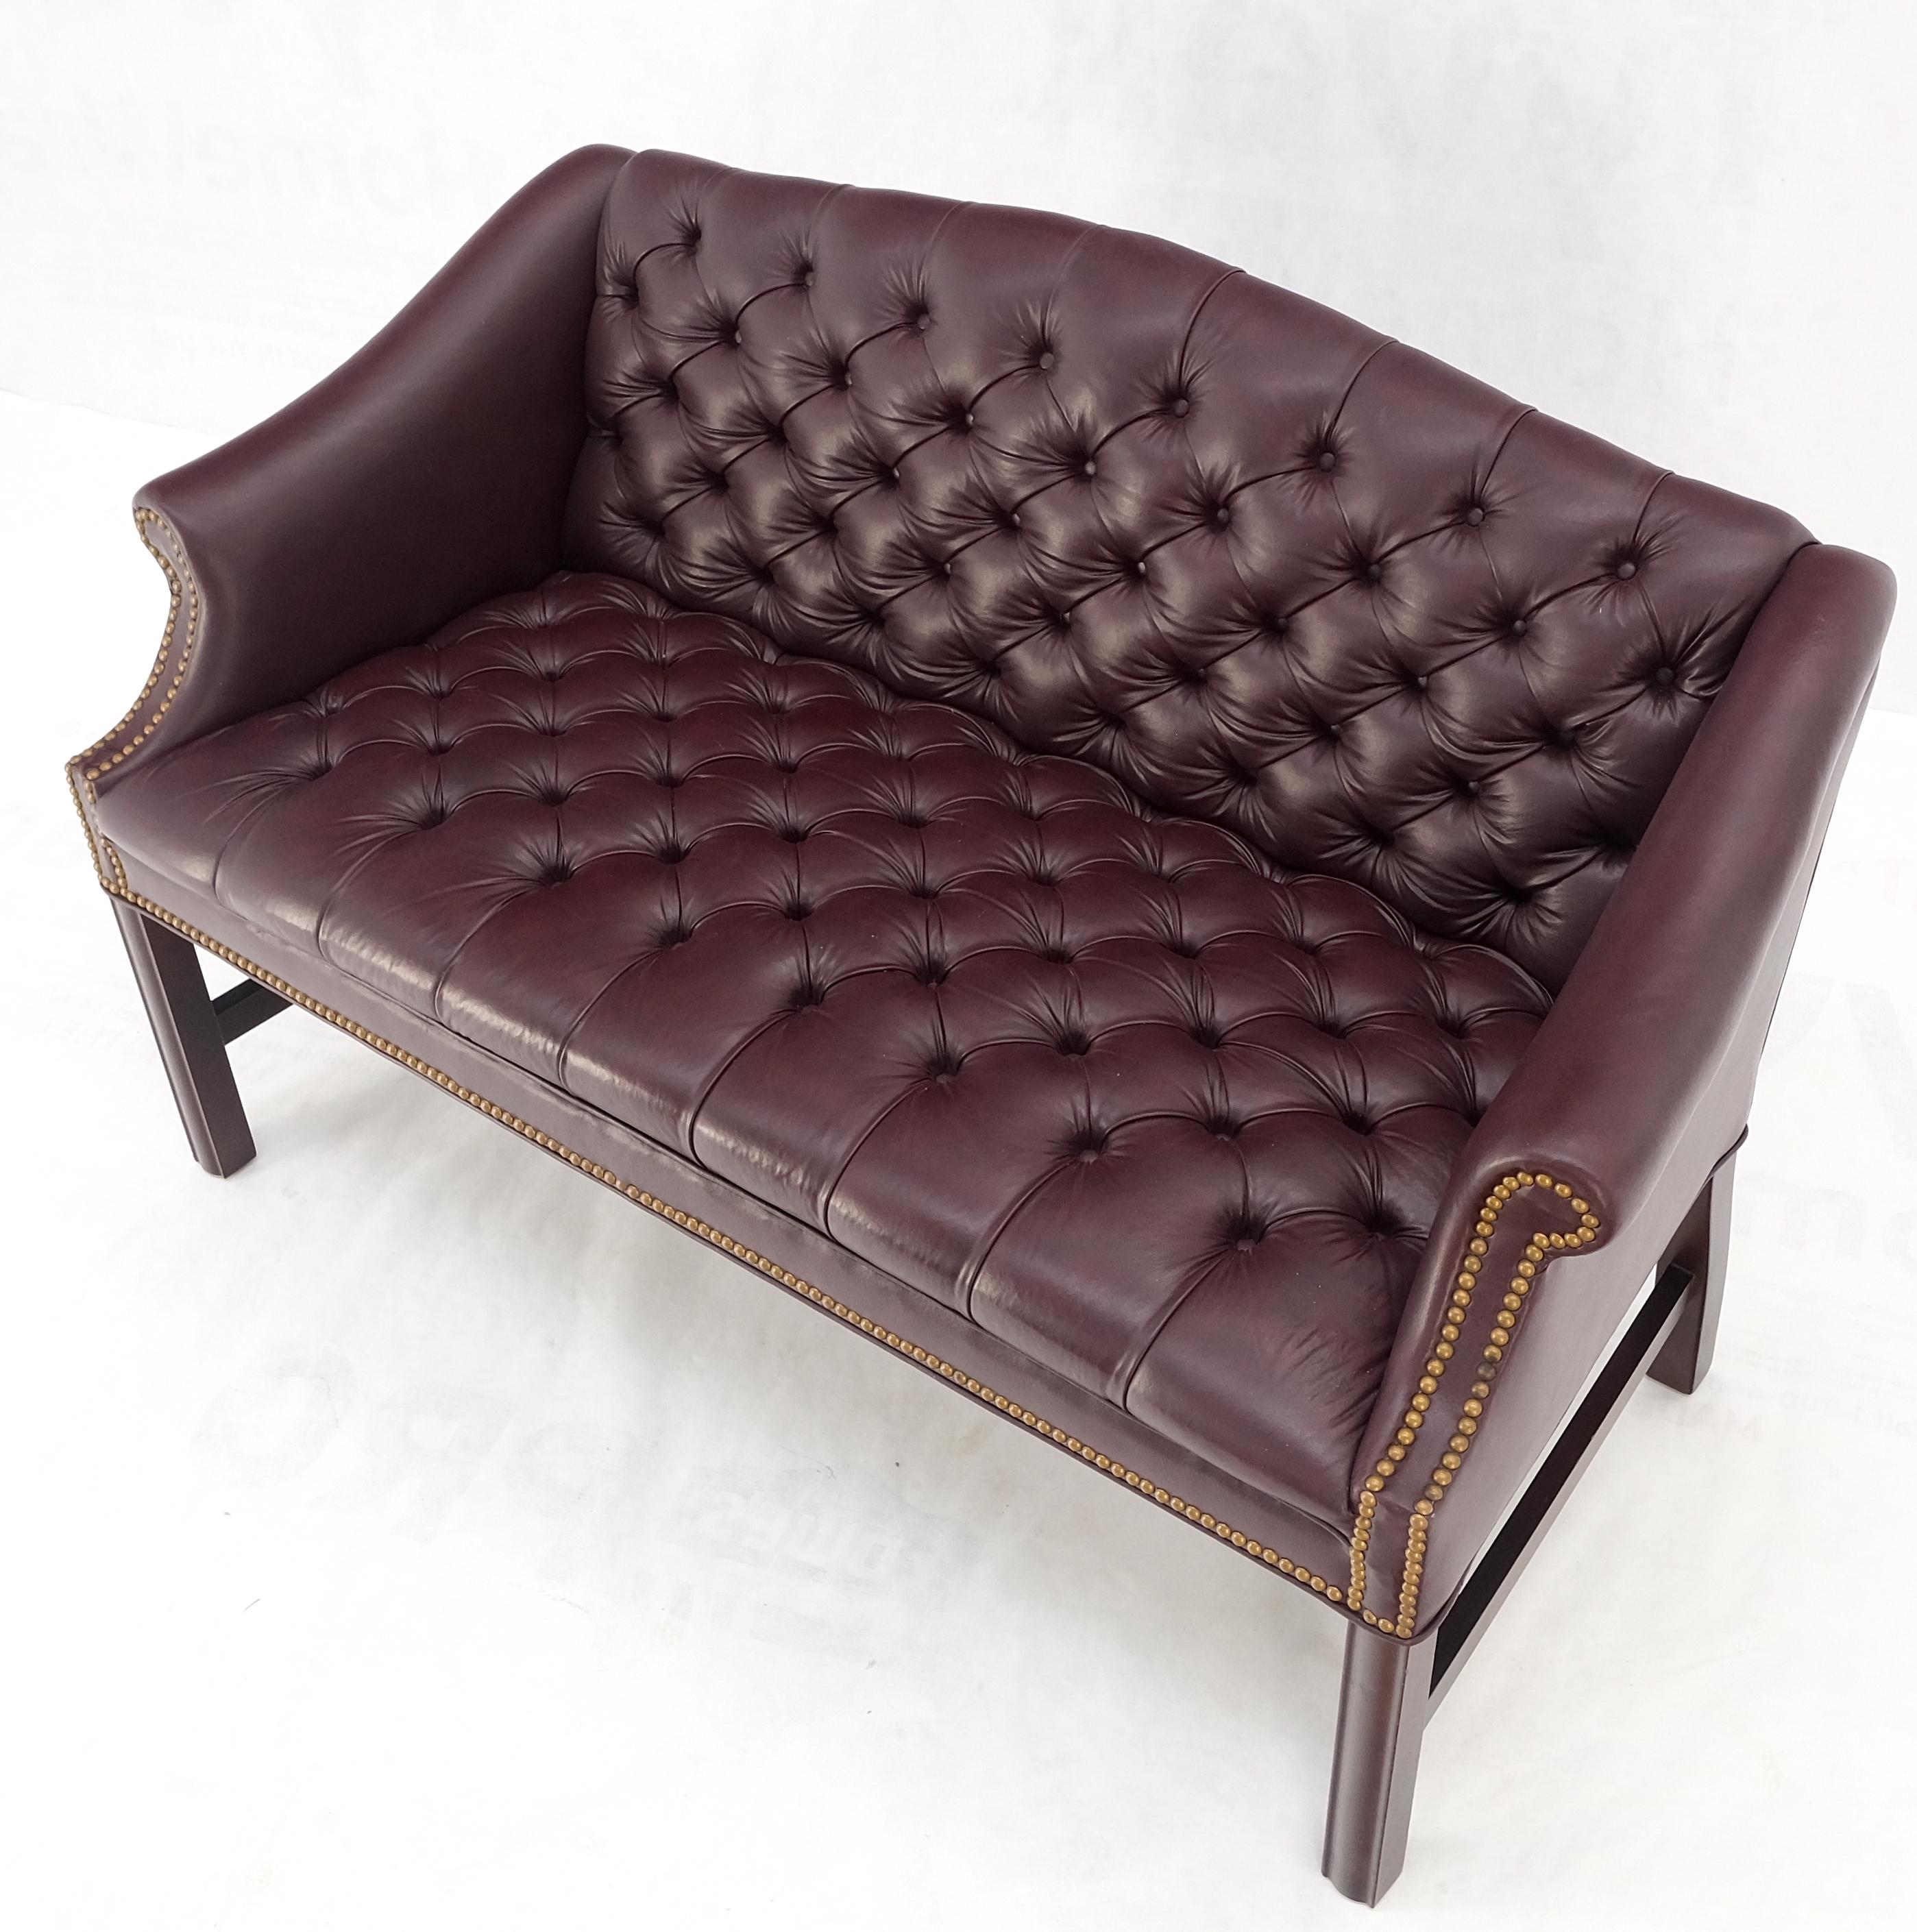 Tufted Burgundy Leather Federal Style Settee Love Seat Couch Sofa MINT! For Sale 6